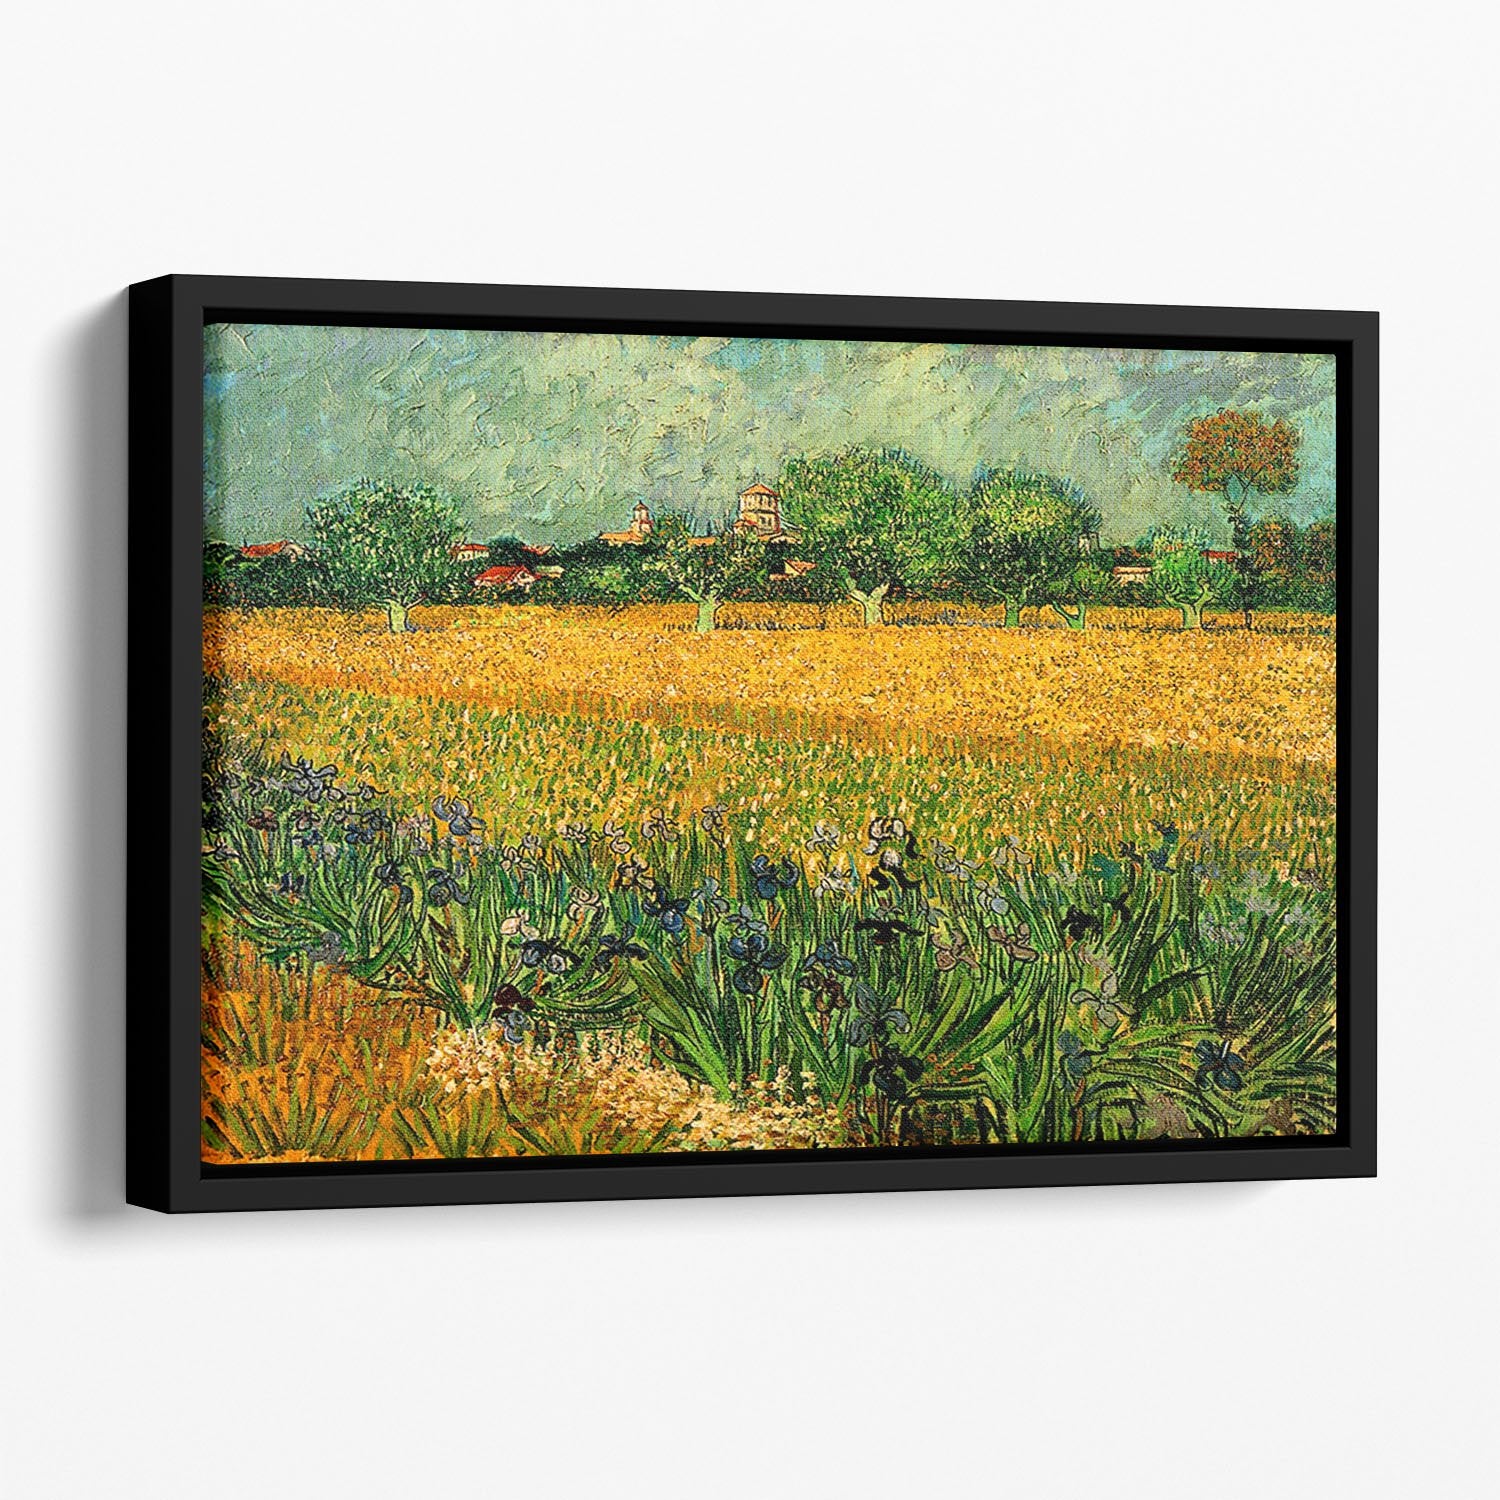 View of Arles with Irises in the Foreground by Van Gogh Floating Framed Canvas